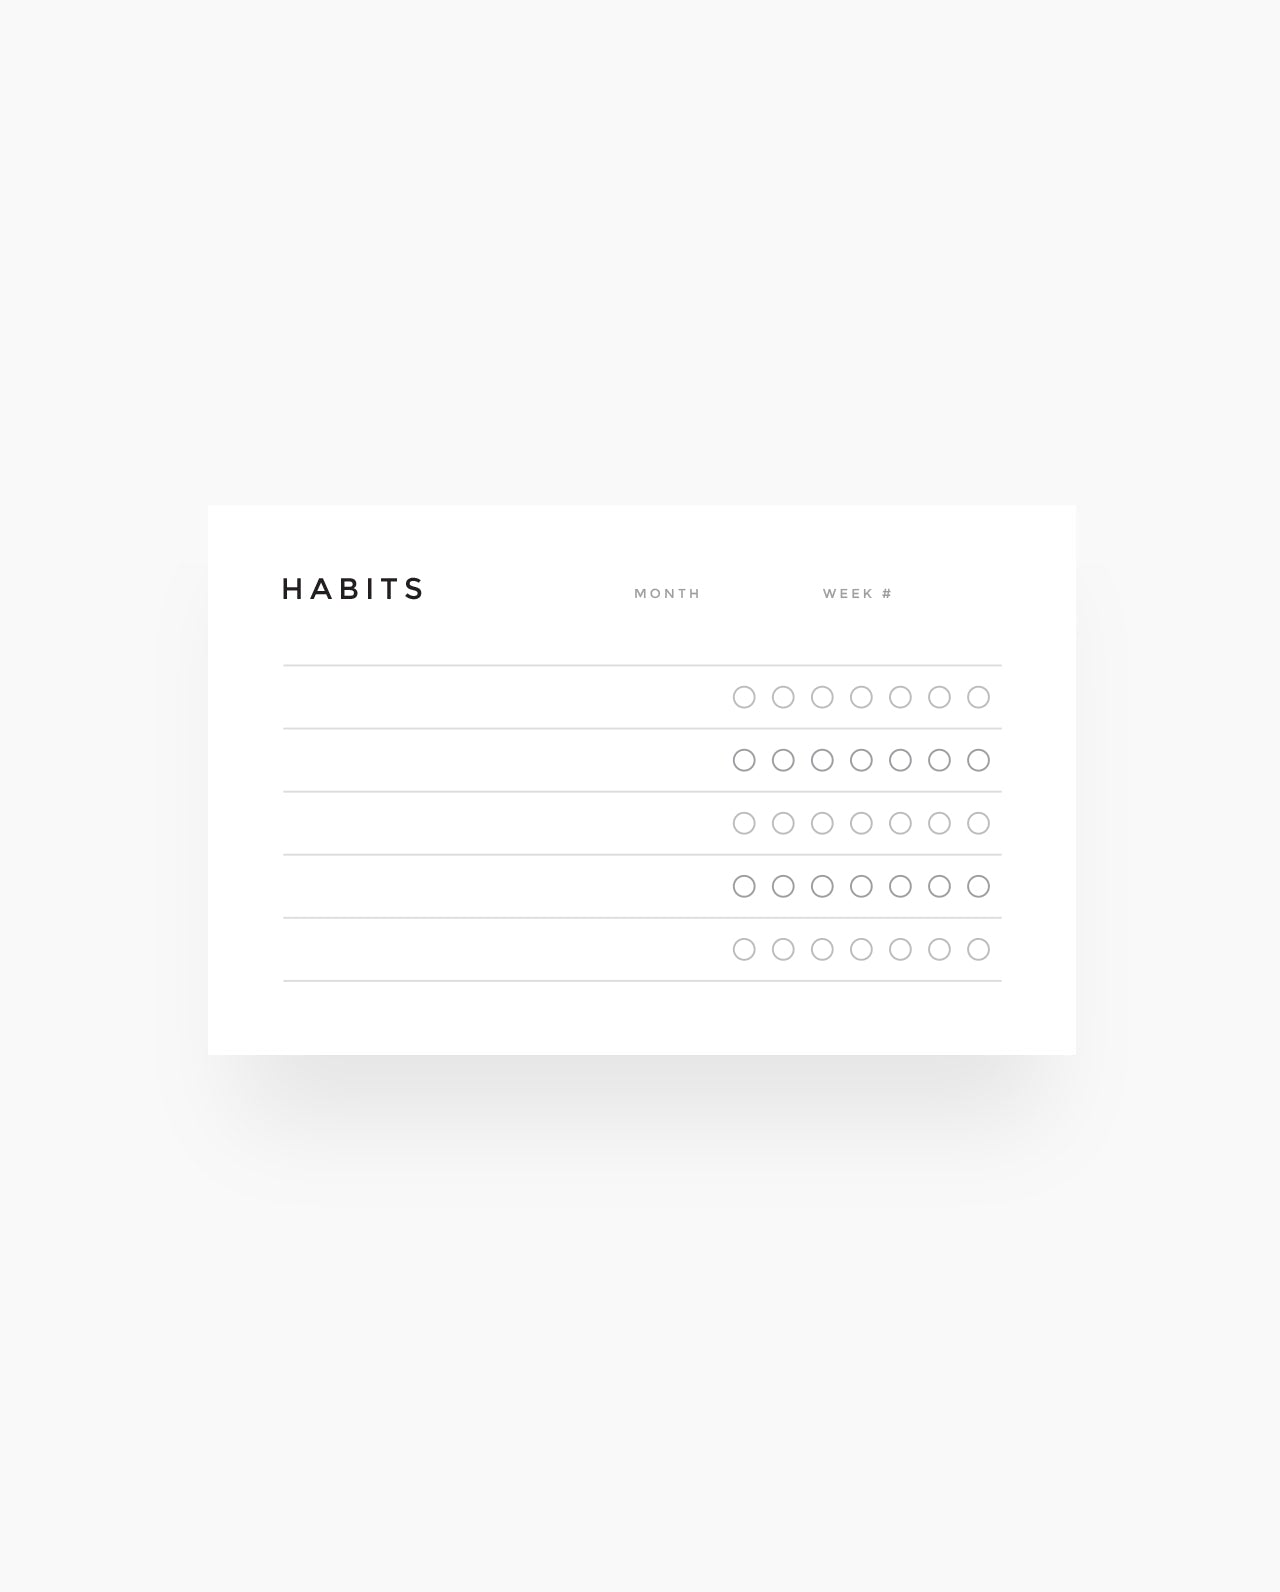 WC009 - Weekly Habits  -  Wallet Cards